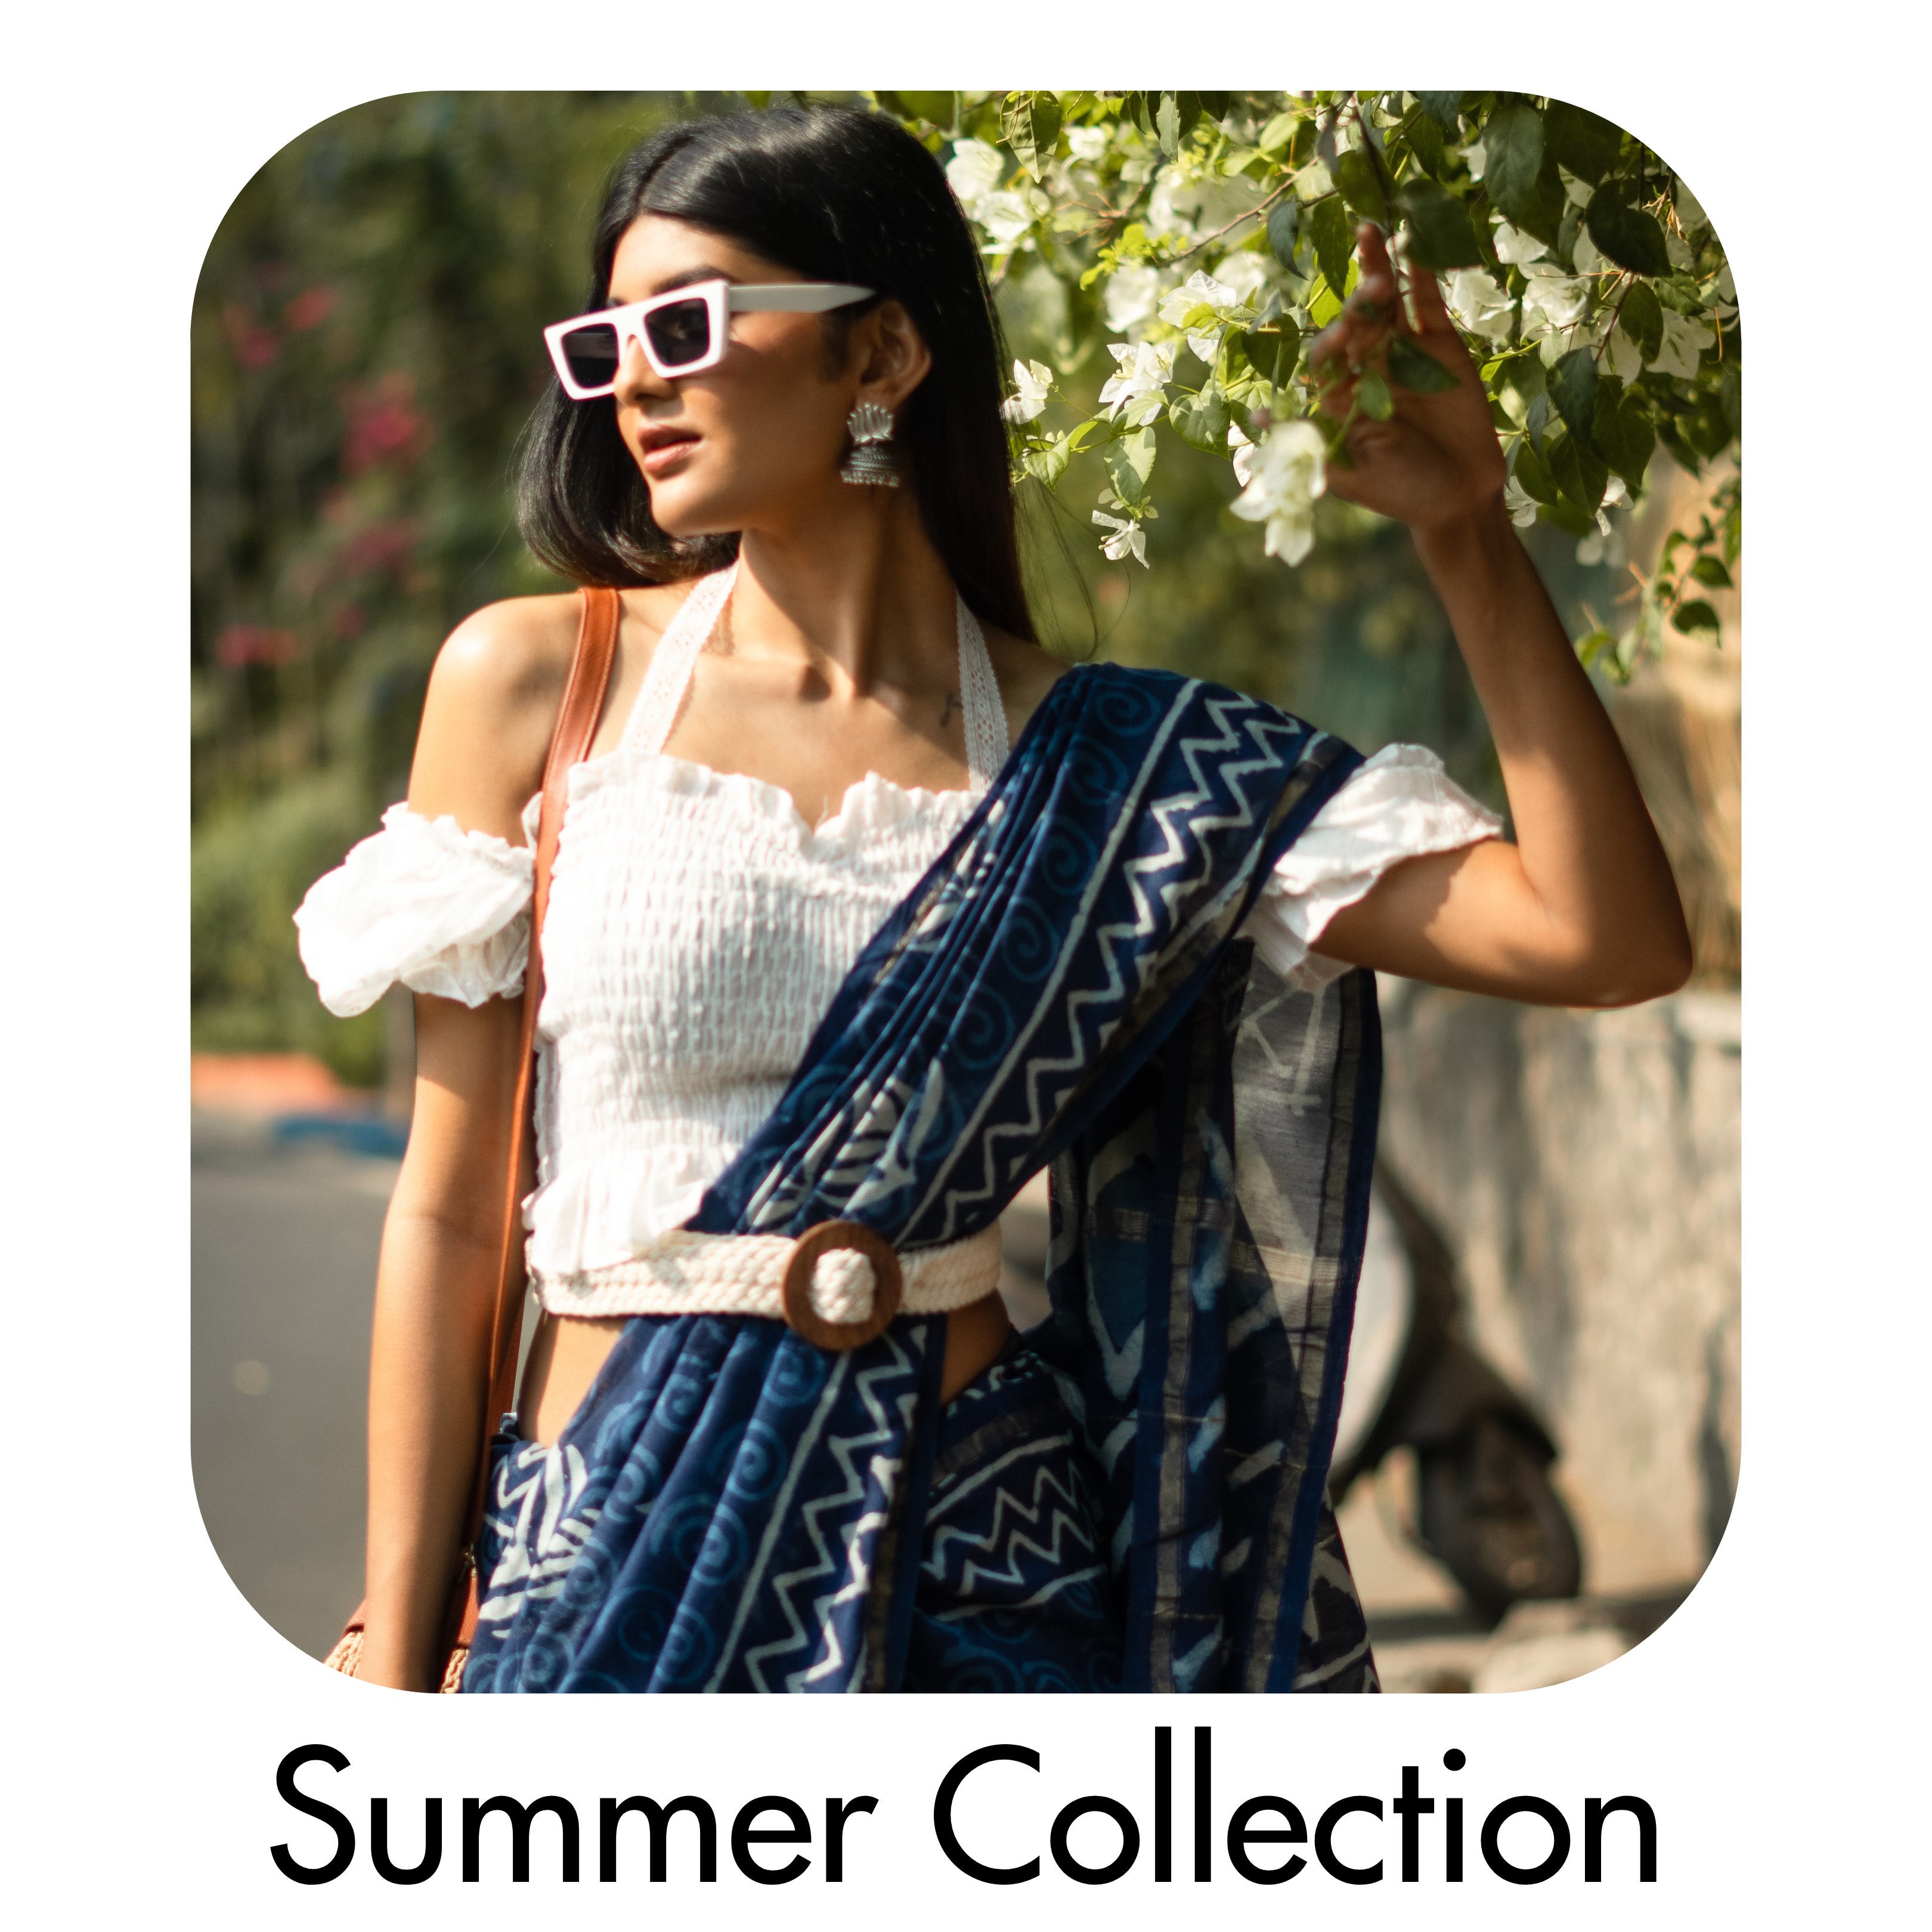 Summer collections